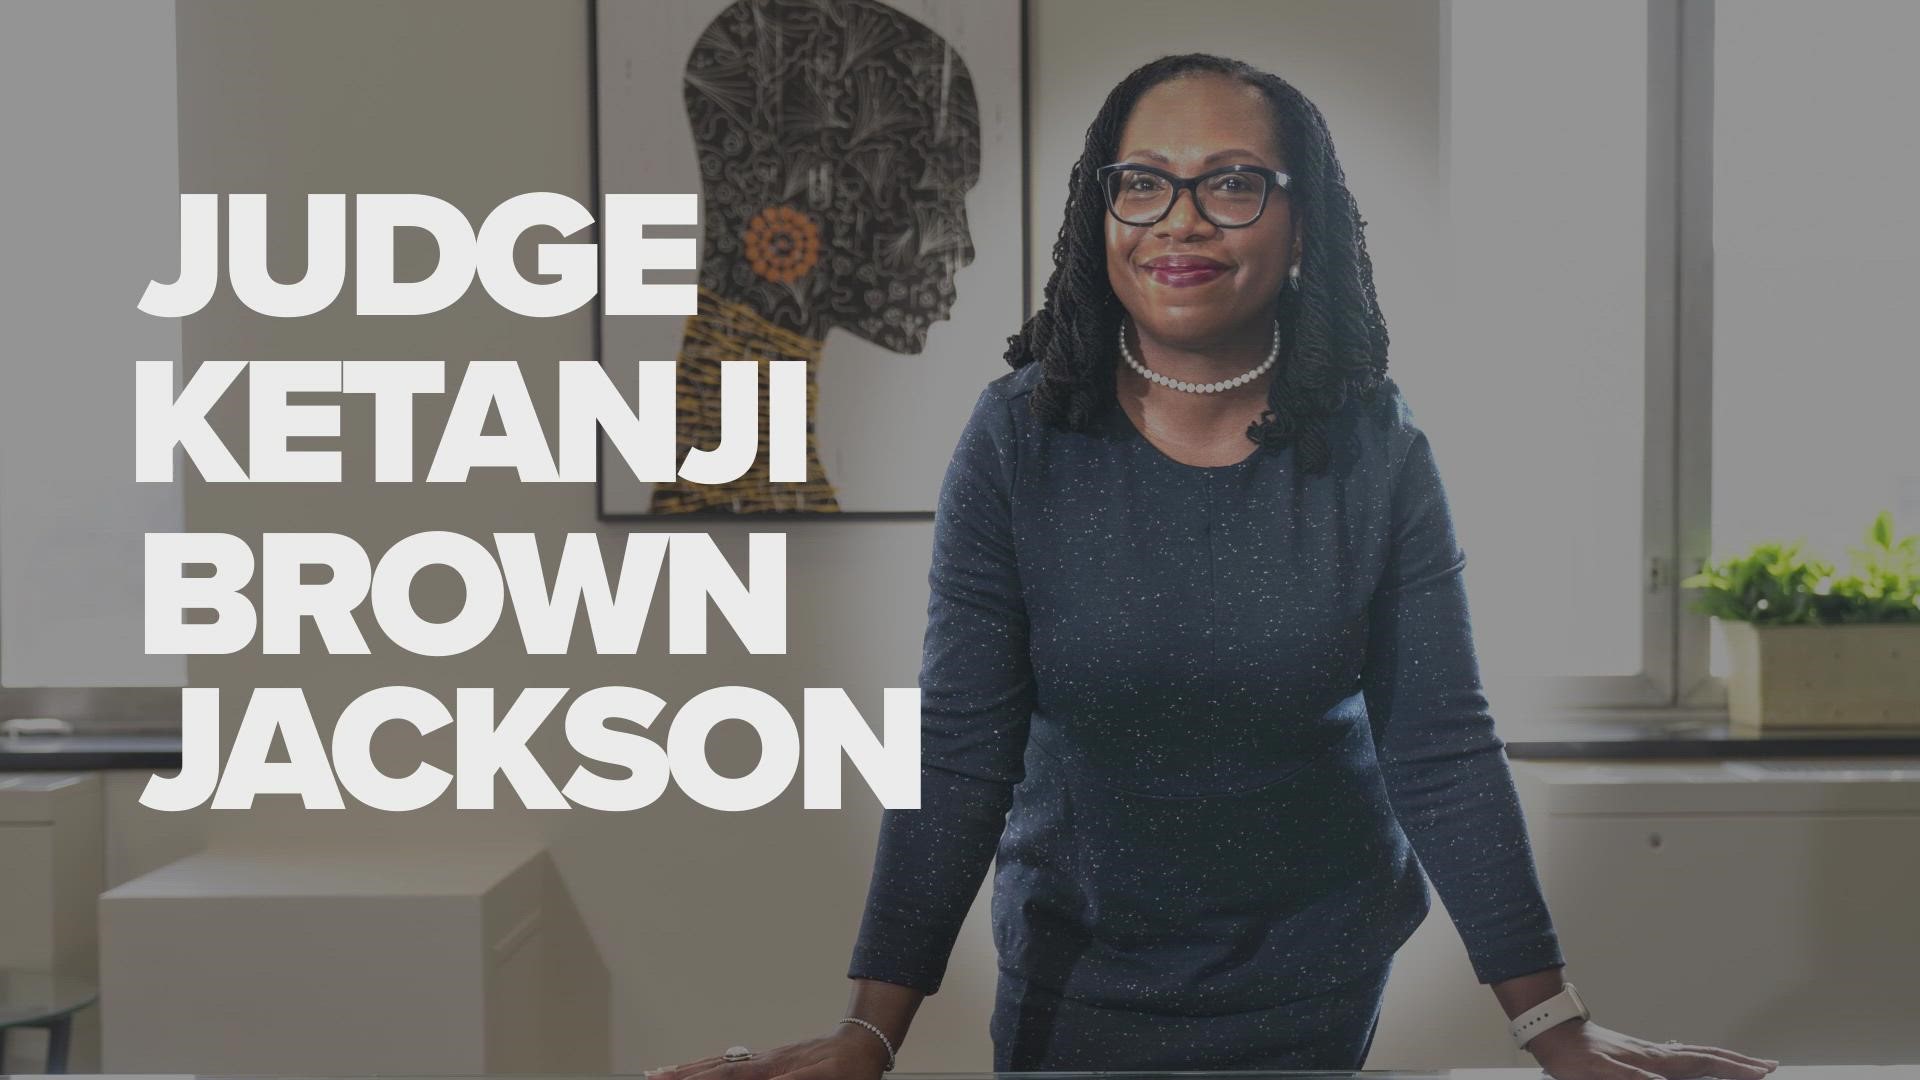 The Senate has confirmed Ketanji Brown Jackson to the Supreme Court, shattering a historic barrier by securing her place as the first Black female justice.